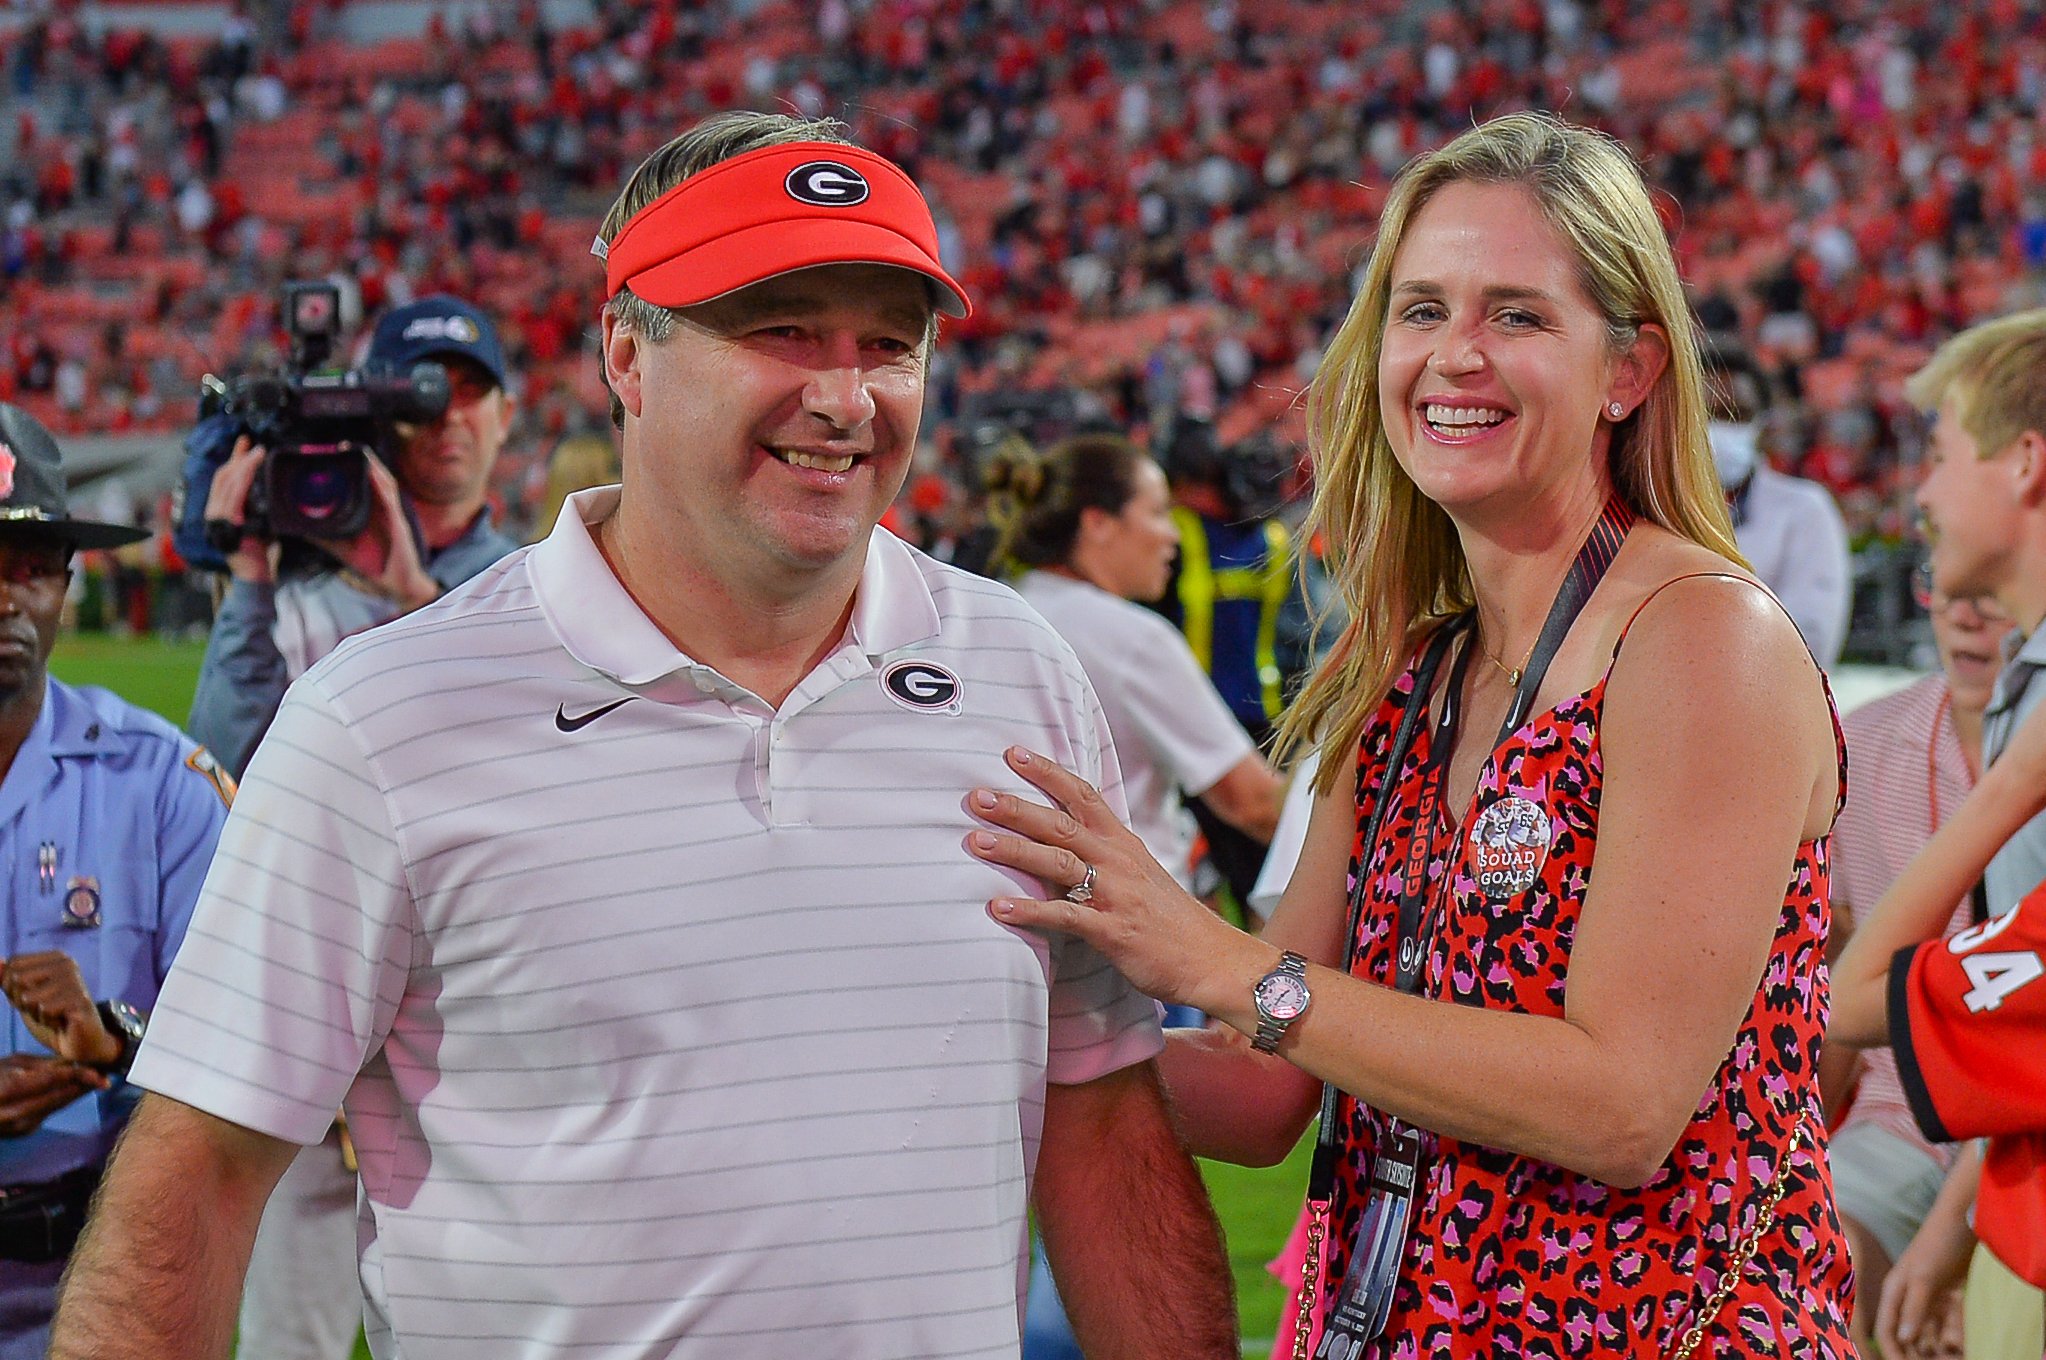 Georgia head coach Kirby Smart with his wife Mary Beth on October 16th, 2021, at Sanford Stadium in Athens, GA. | Source: Getty Images